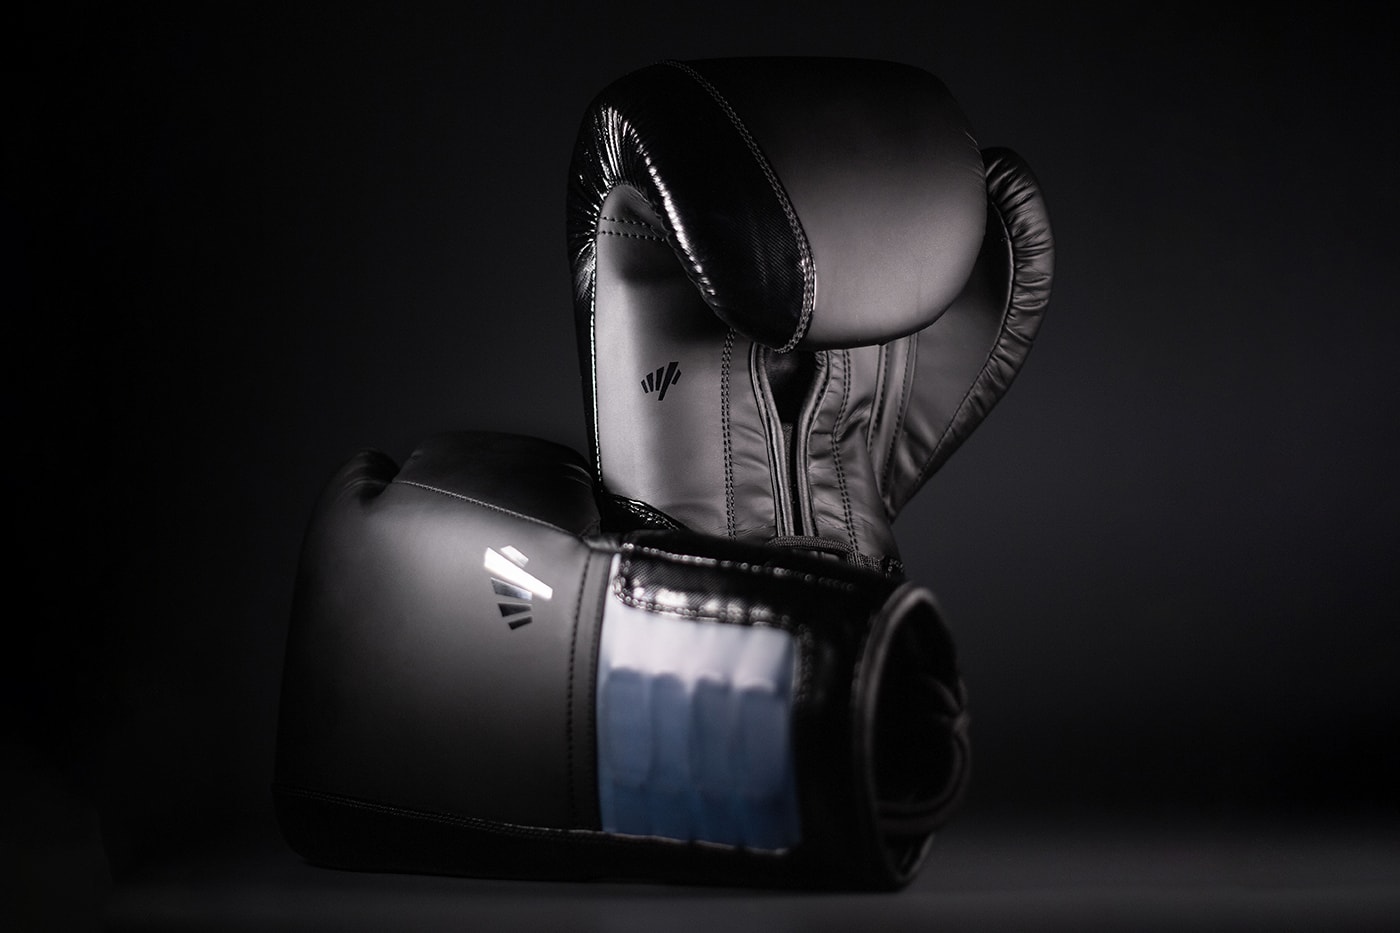 Max Holloway Sanabul Holloway 1 Gloves Release Info Date Buy Price MMA UFC